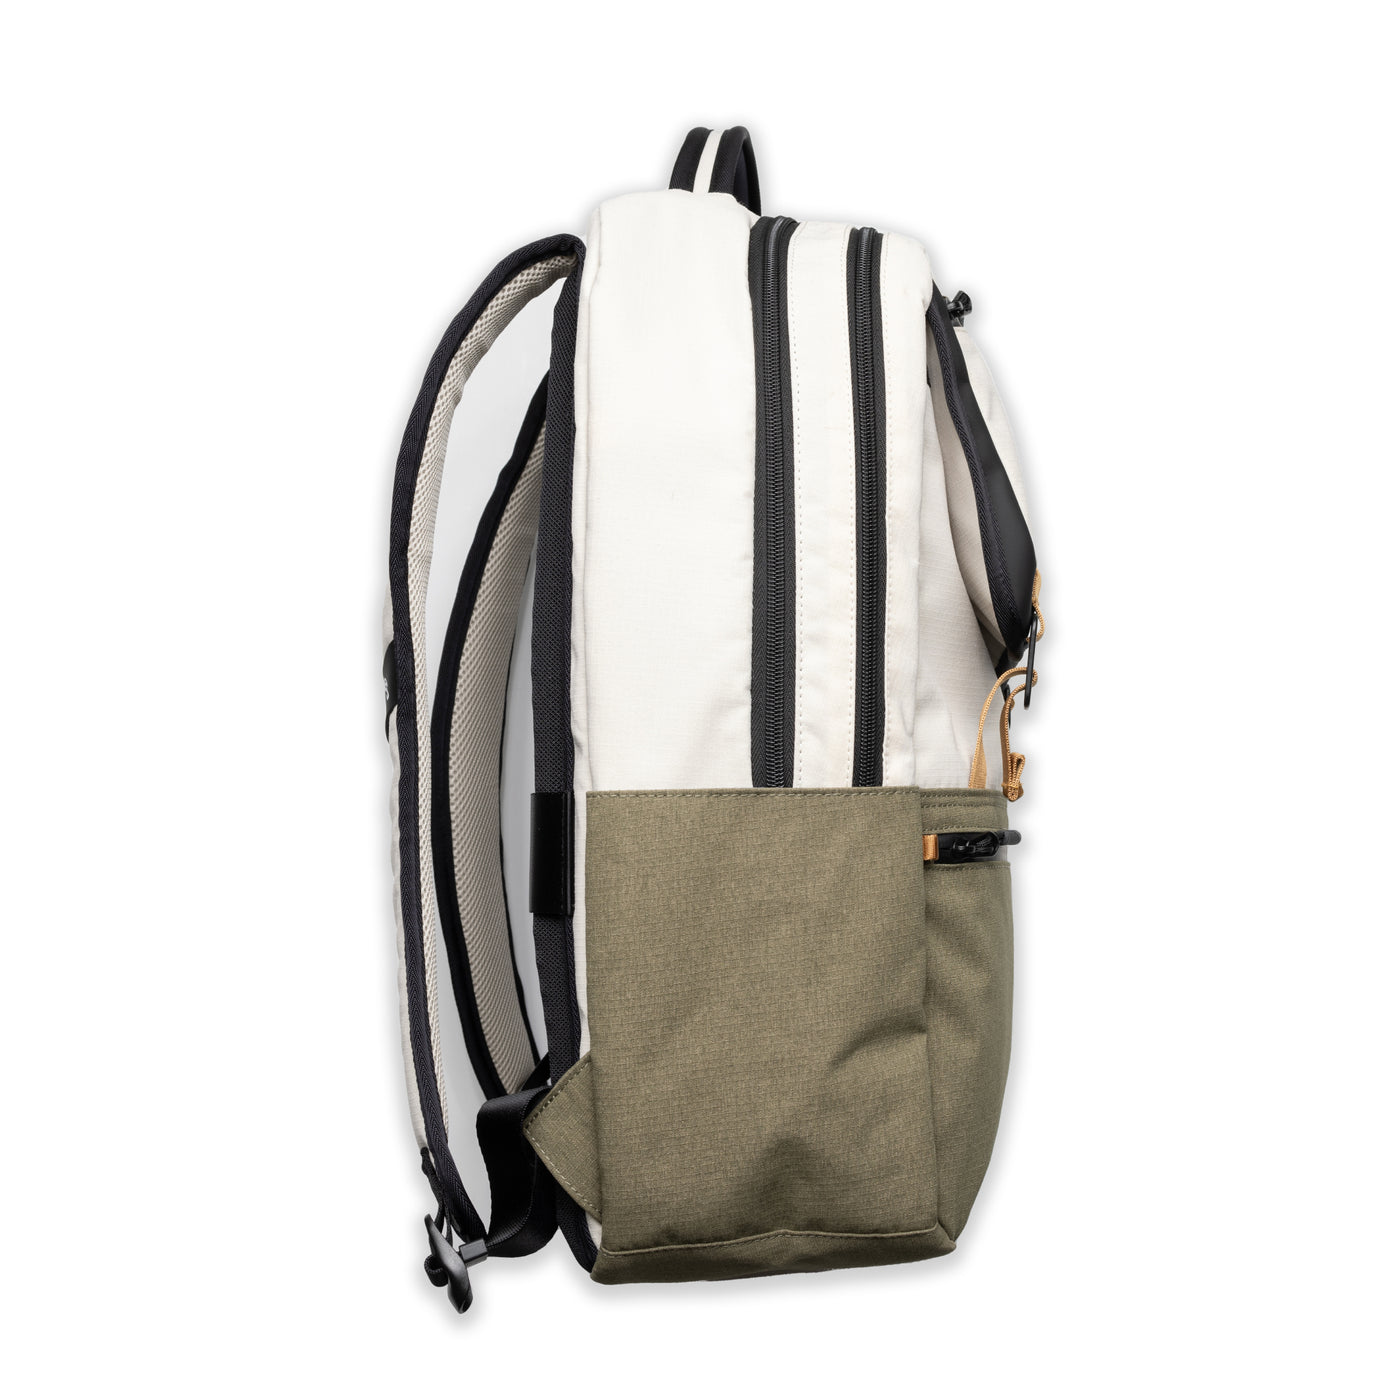 A2 Backpack R - Le Creme/Olive